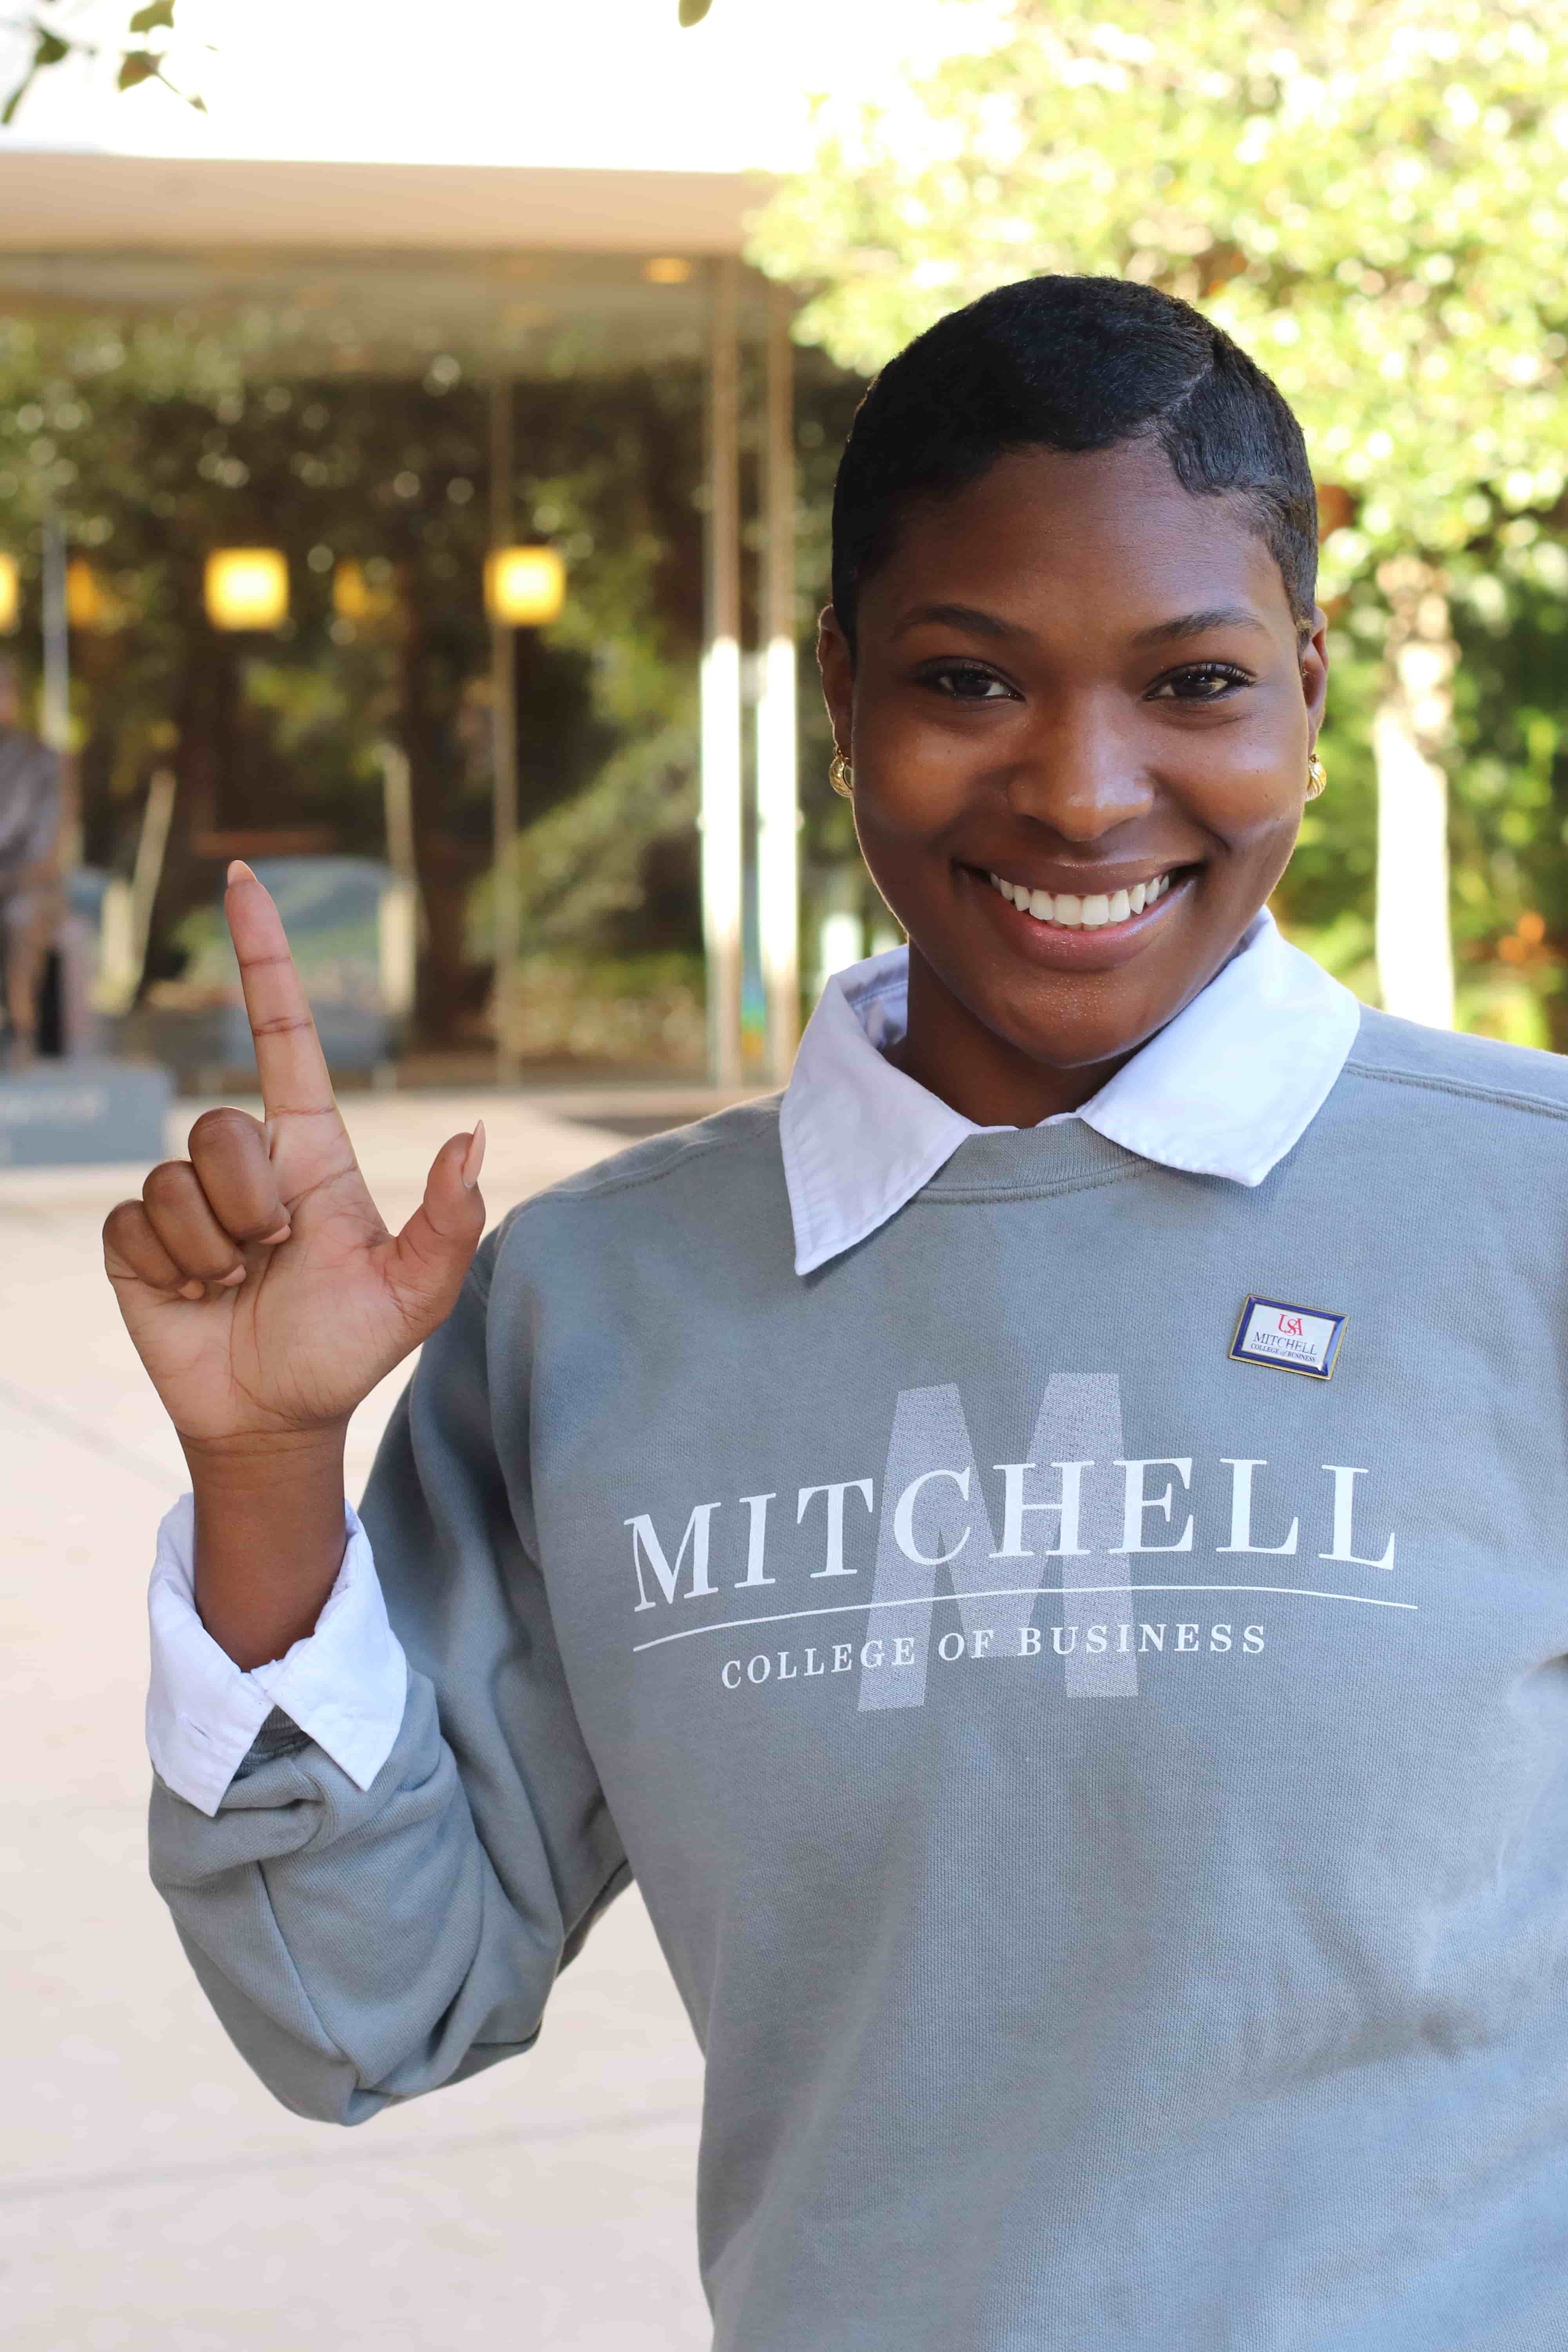 DeKaila Stewart-Ruffin is a Marketing major at the University of South Alabama’s Mitchell College of business. She came to the university after withstanding an injury that ended her military career.